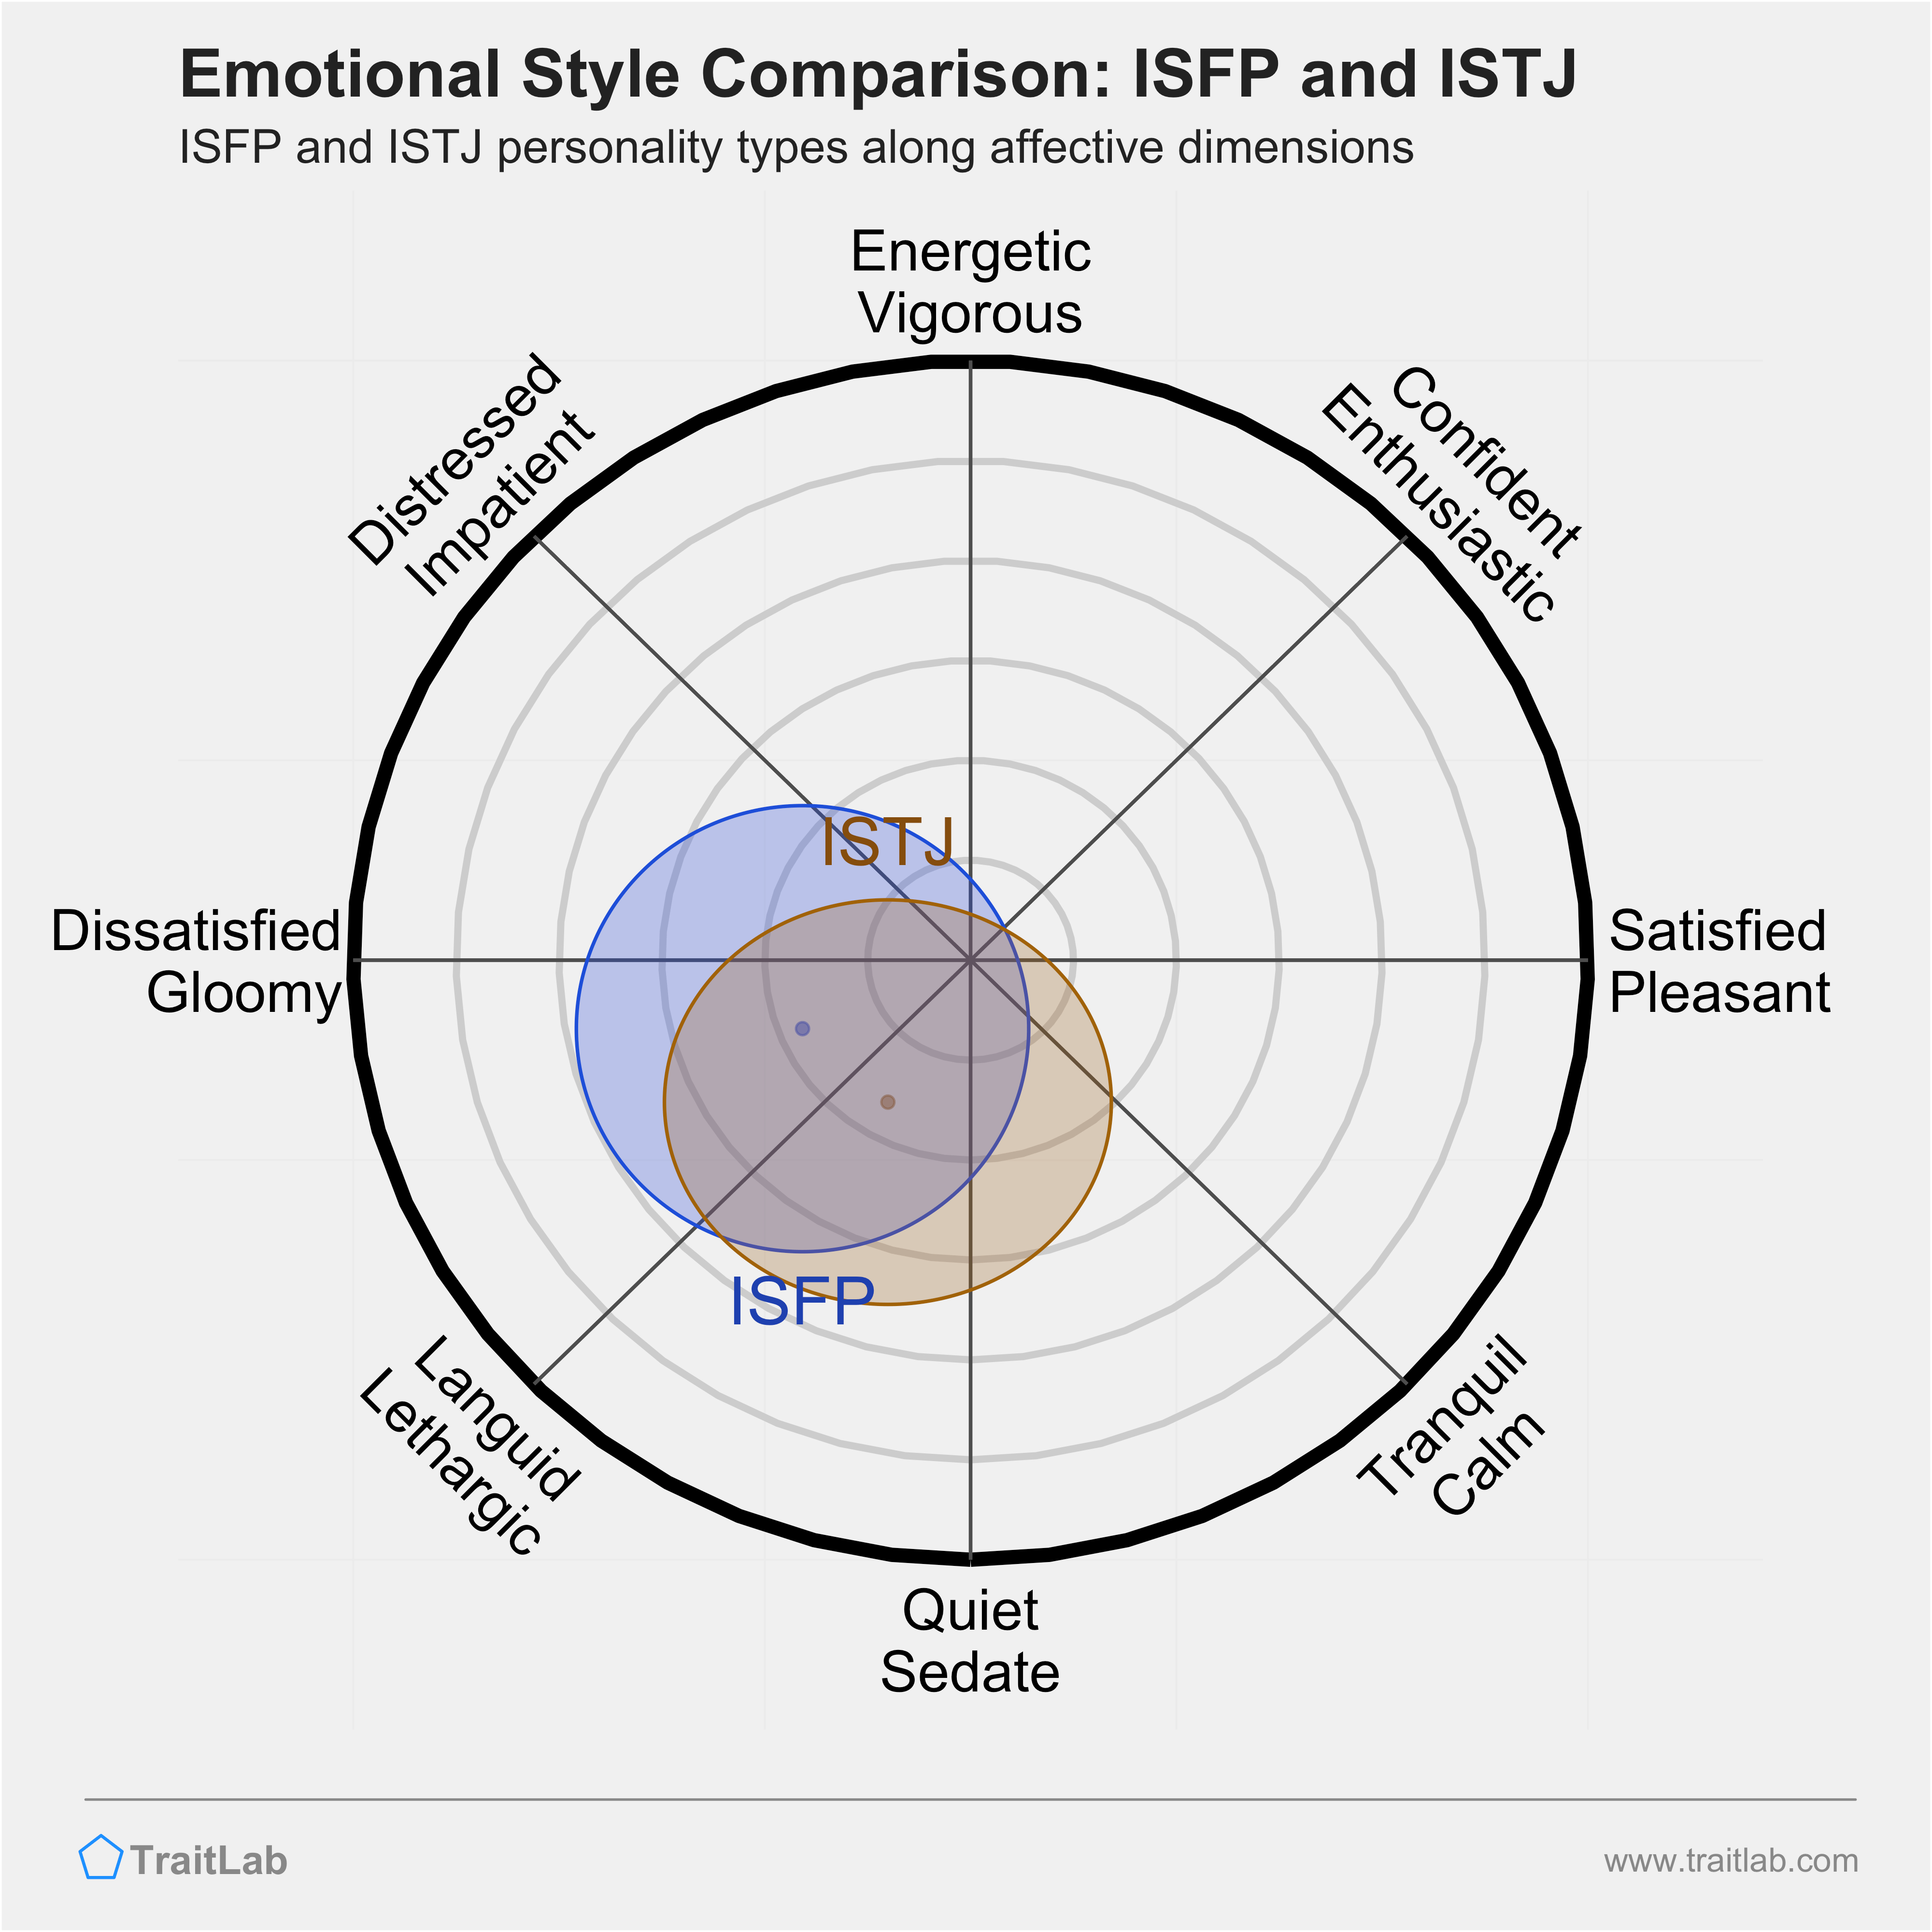 ISFP and ISTJ comparison across emotional (affective) dimensions